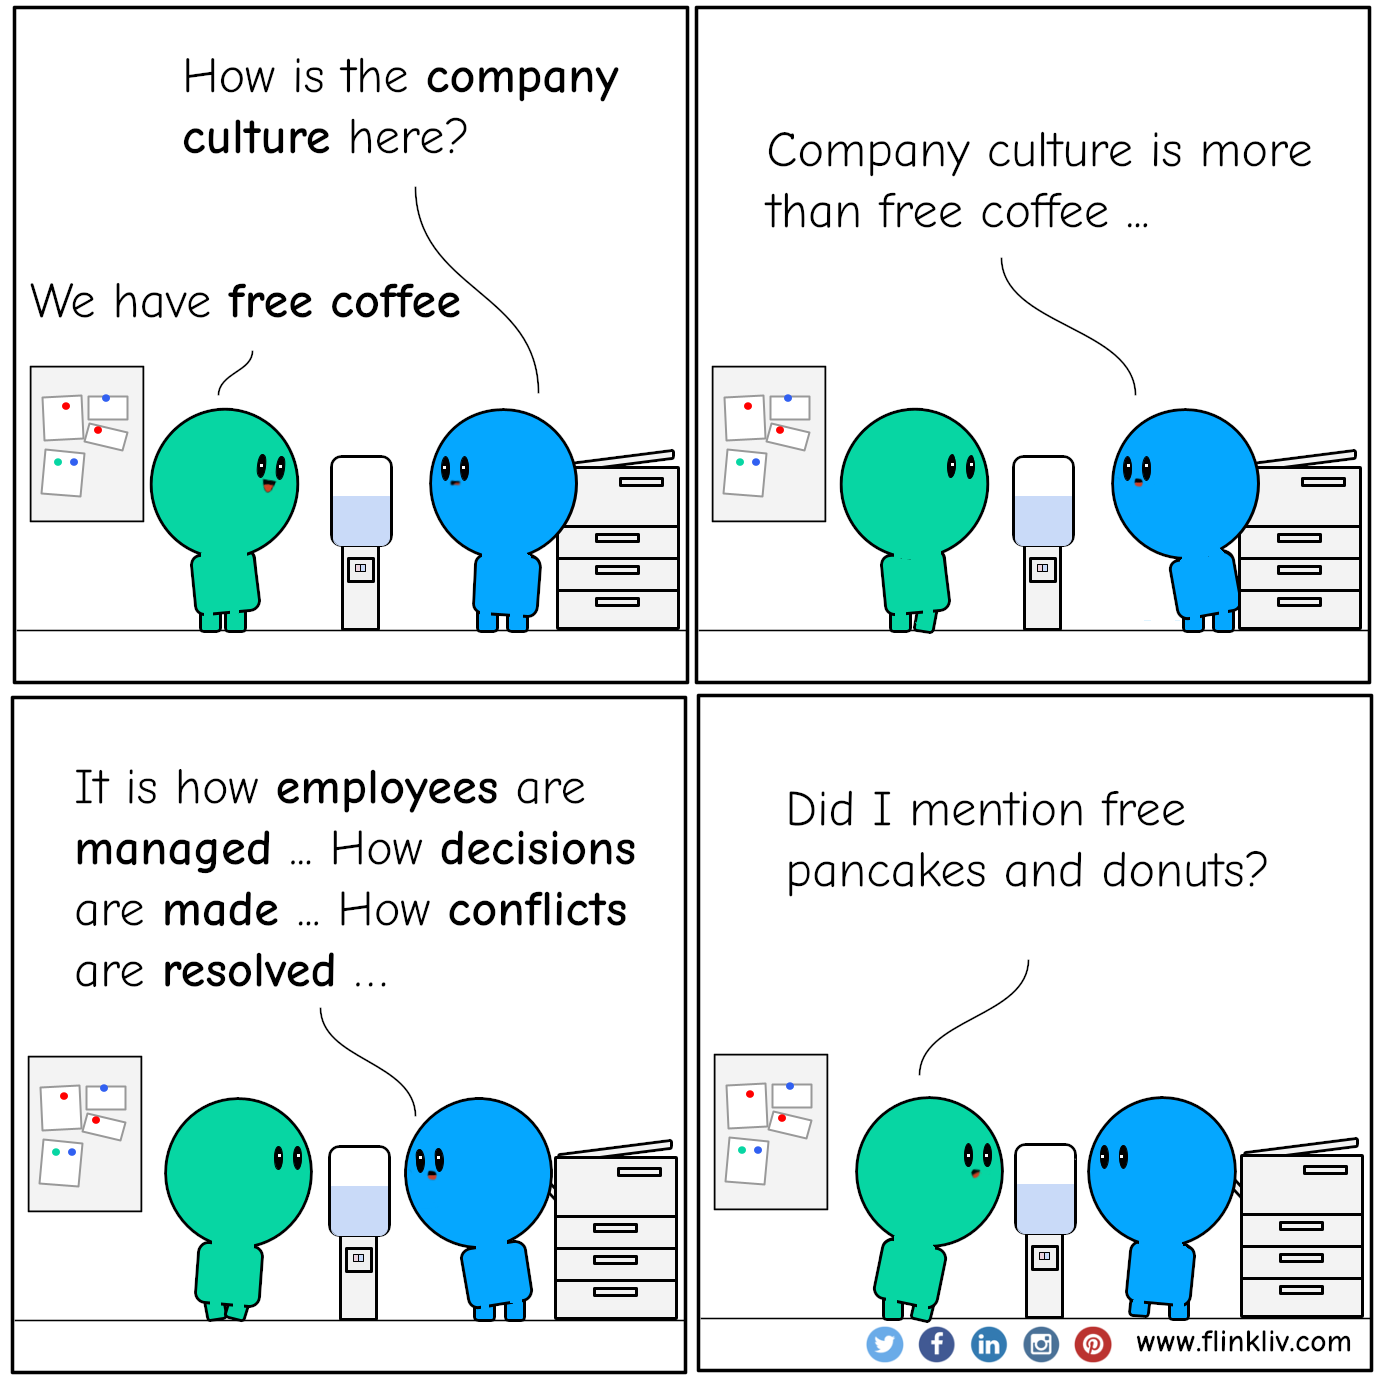 Conversation between A and B about company culture and values. A: How is the company culture here? B: It is great; we have free coffee. B: Company culture is more than free coffee. B: Company culture is how employees are managed, how decisions are made, how conflicts are resolved, how your customers are treated. A: Did I mention that we also have free pancakes and donuts on Fridays? By flinkliv.com